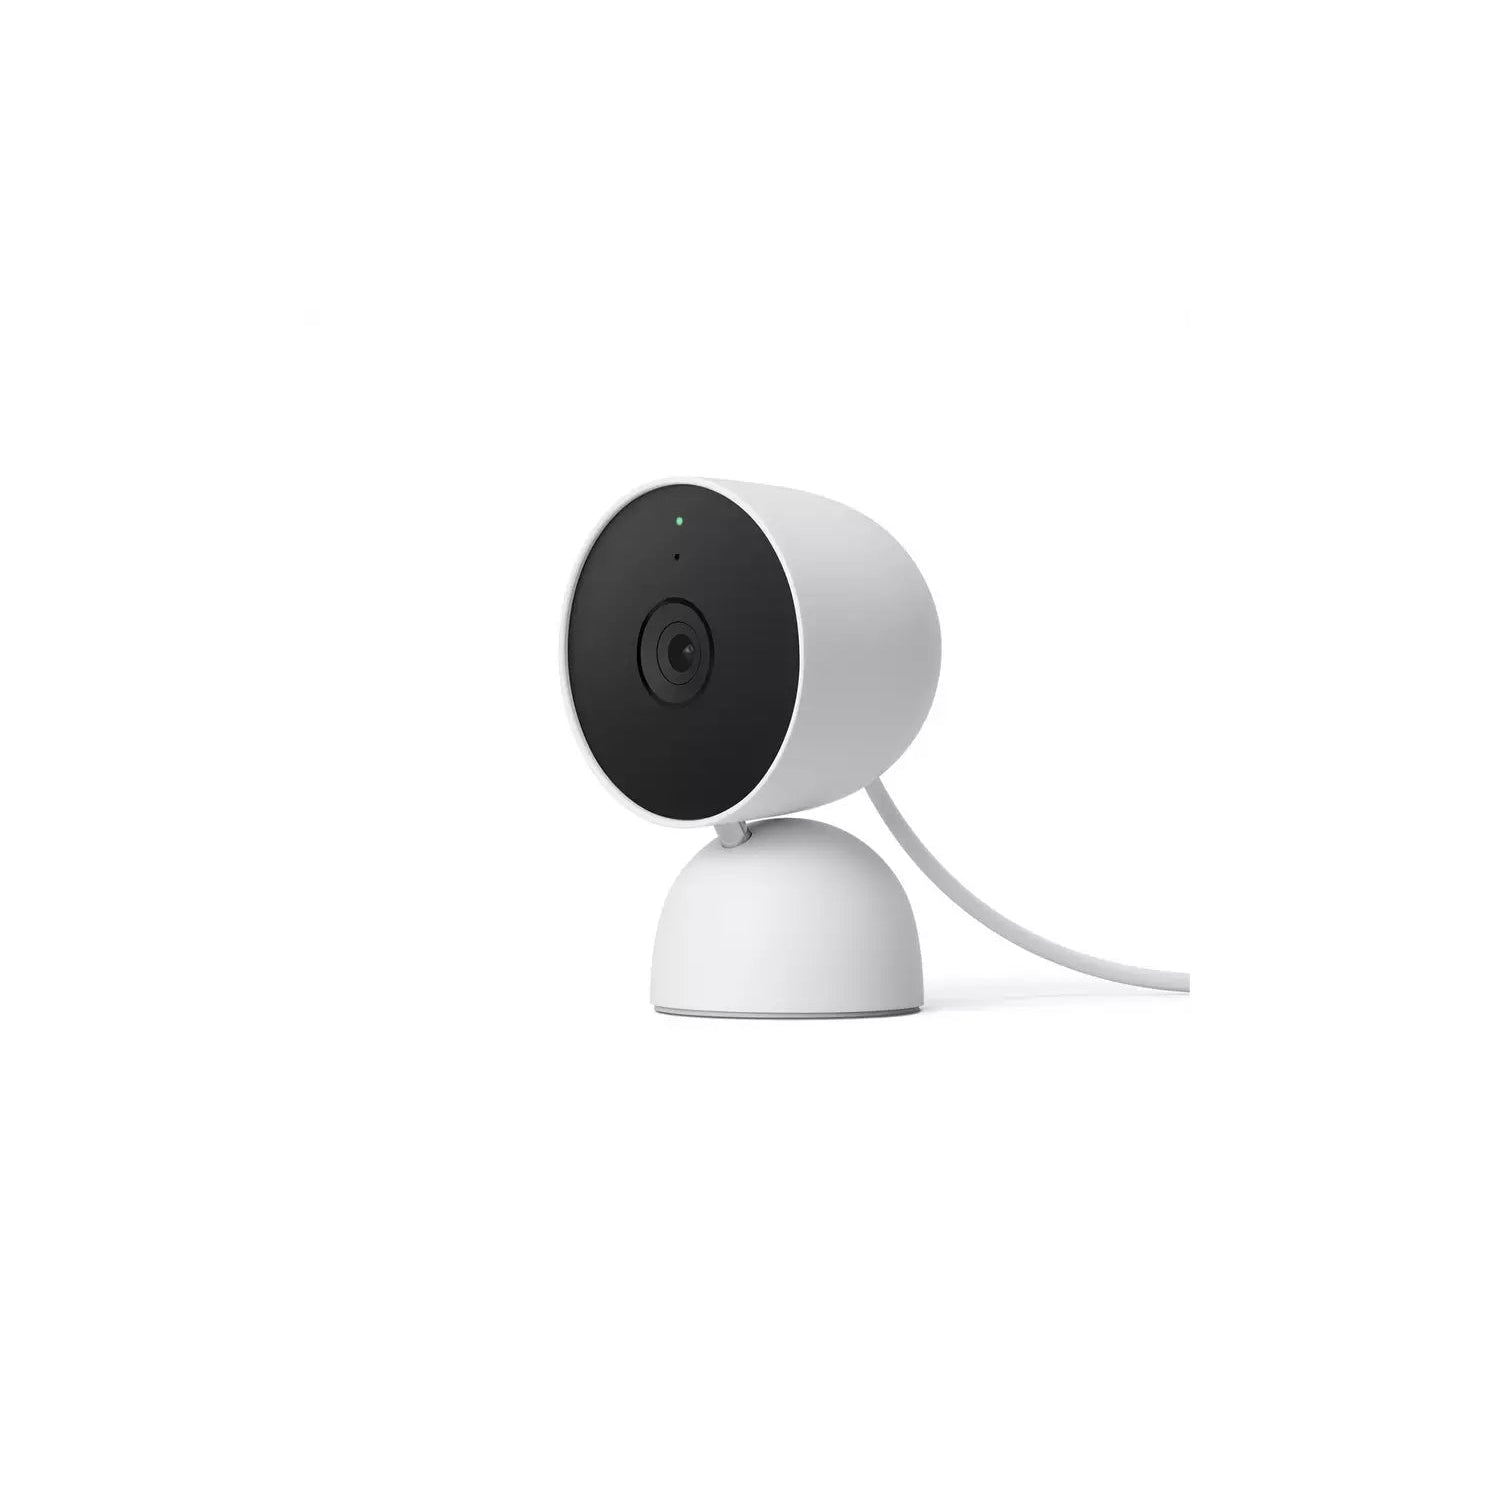 Google Nest Cam Indoor Security Camera Full HD 1080p - White - NO CHARGER